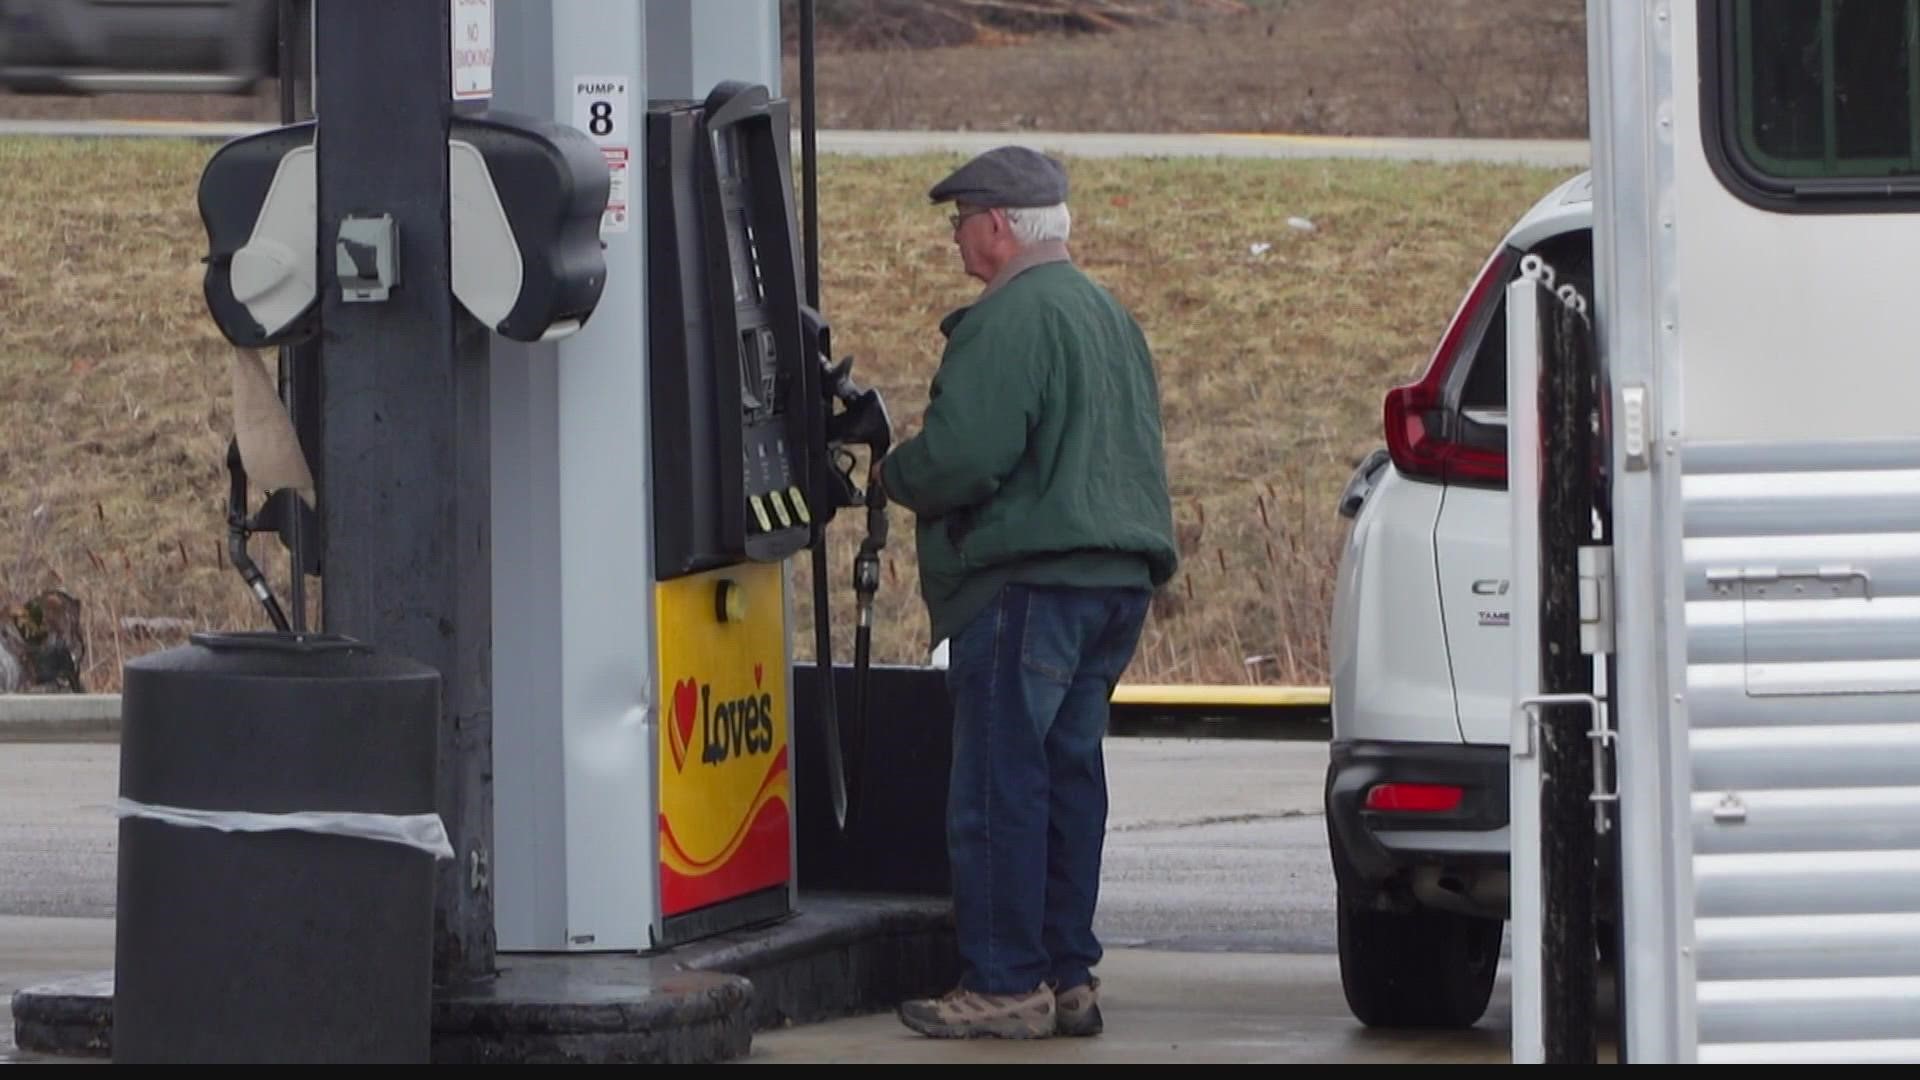 Surging gas prices are hitting just about everyone lately.